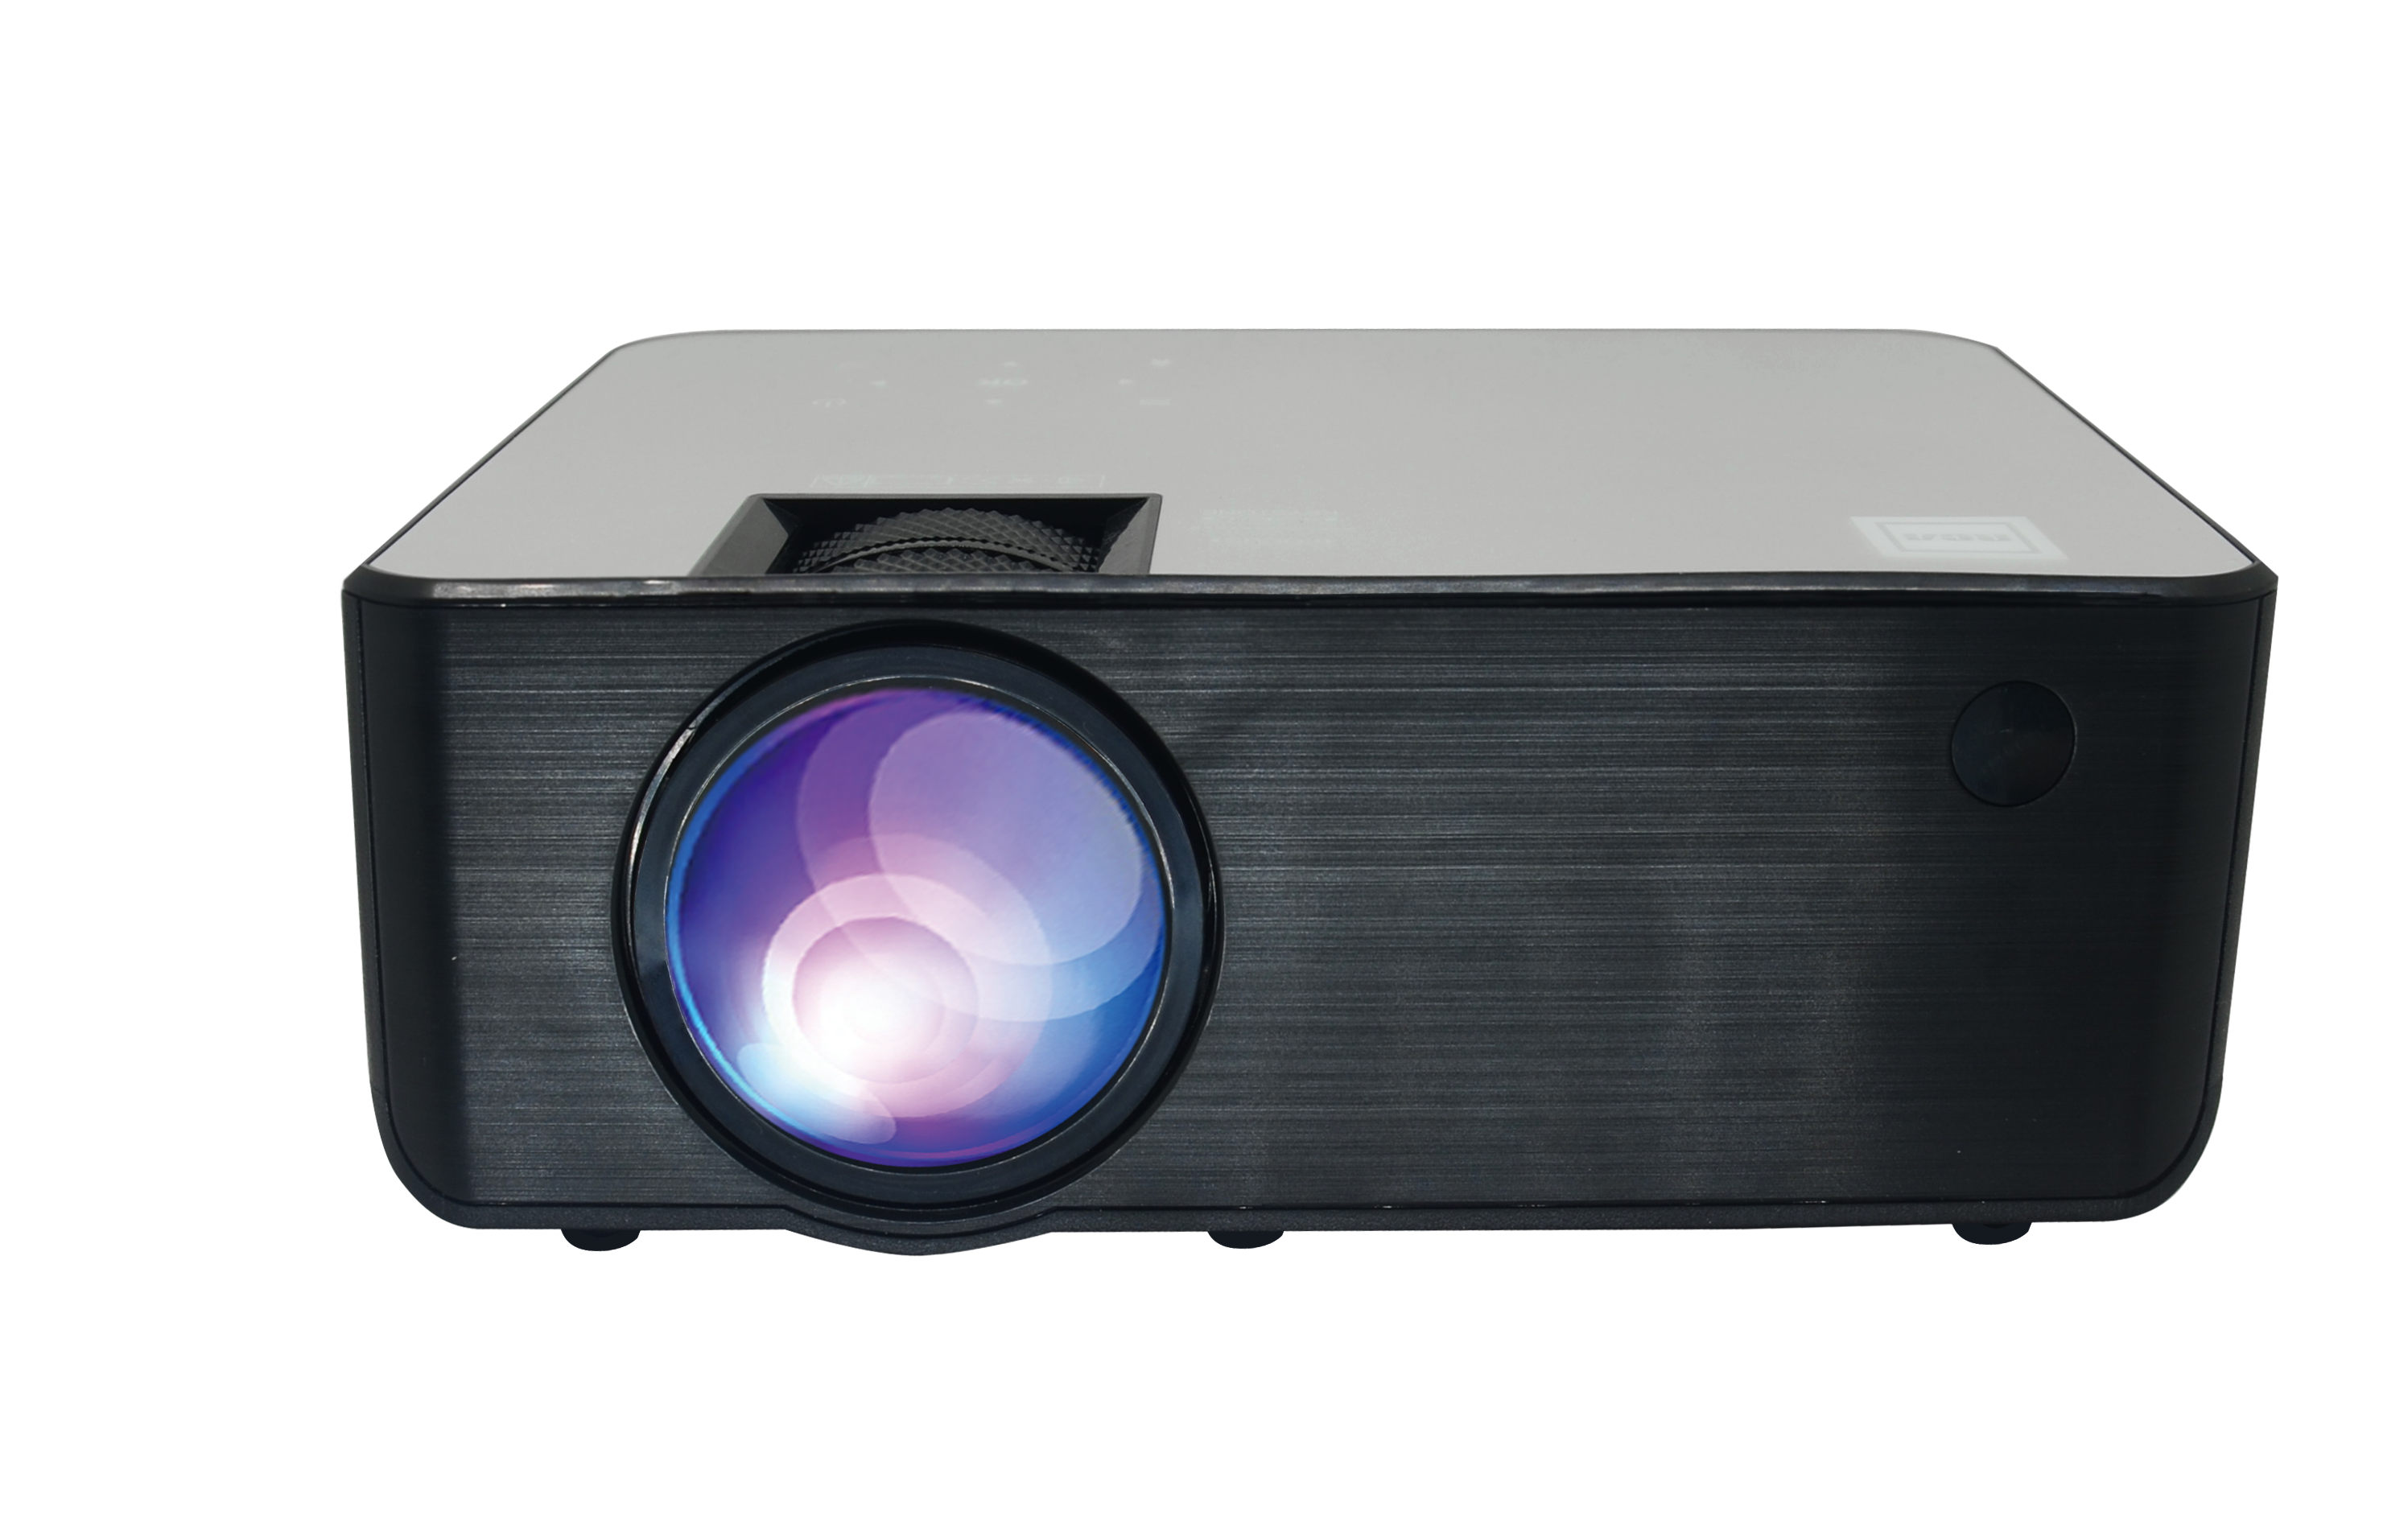 RCA RPJ133 720p Home Theater Projector with Roku Streaming Stick